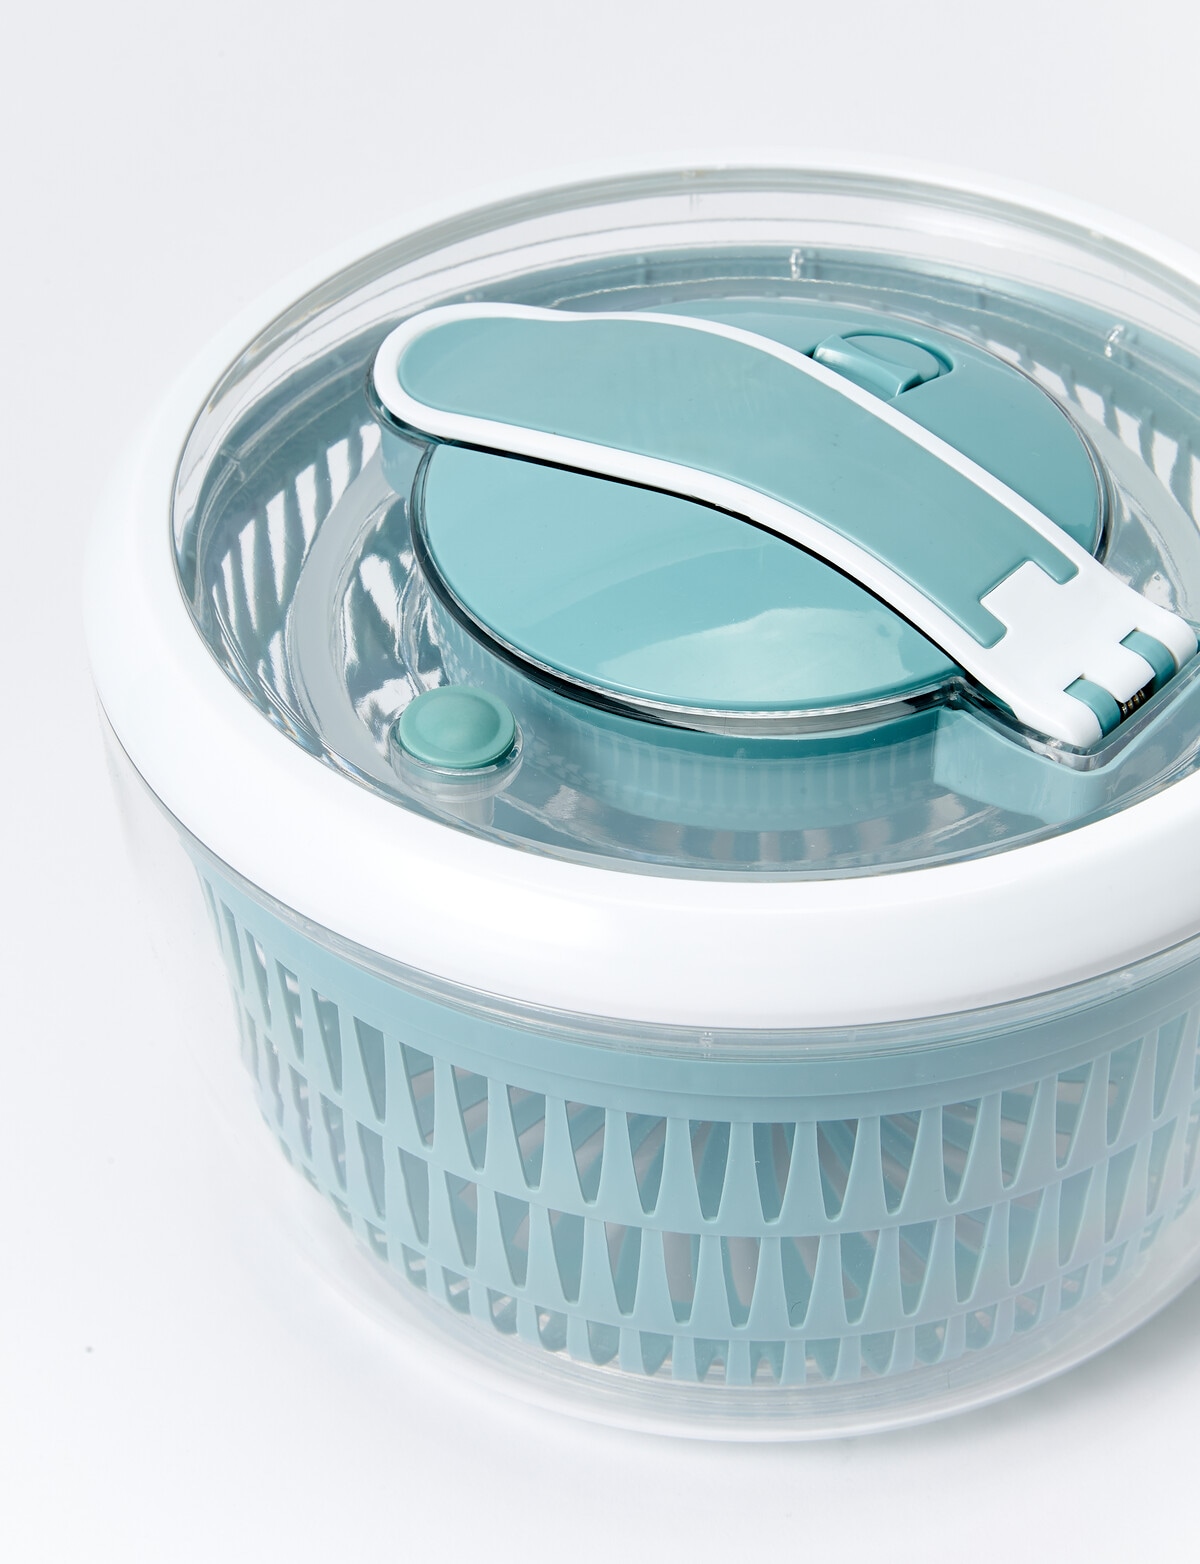 SPIN&STORE SALAD SPINNER WITH LID Ø26 'KITCHEN ACTIVE DESIGN